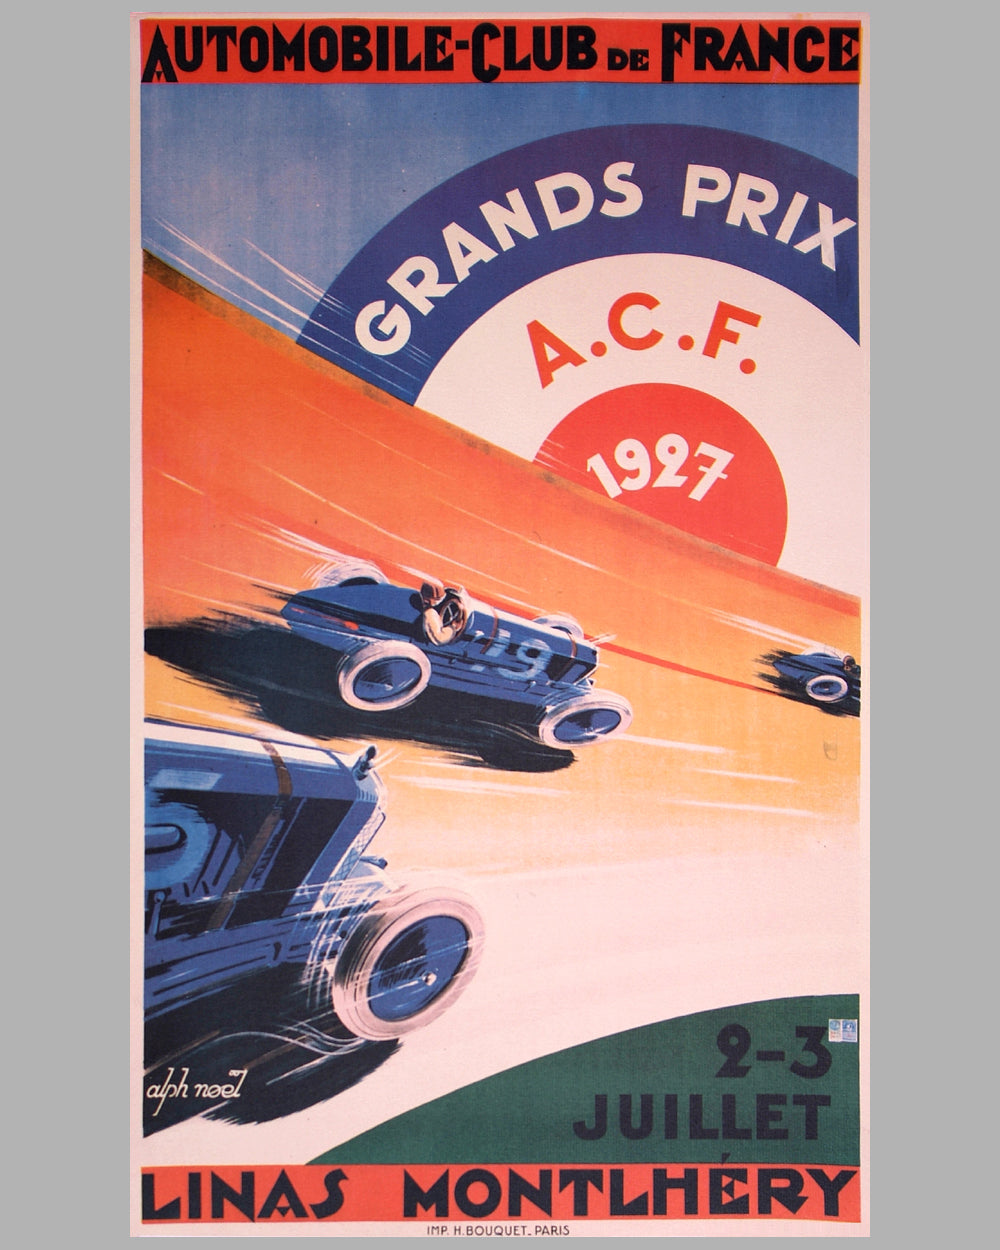 French Grand Prix at Montlhery 1927 official event poster by Alph Noel